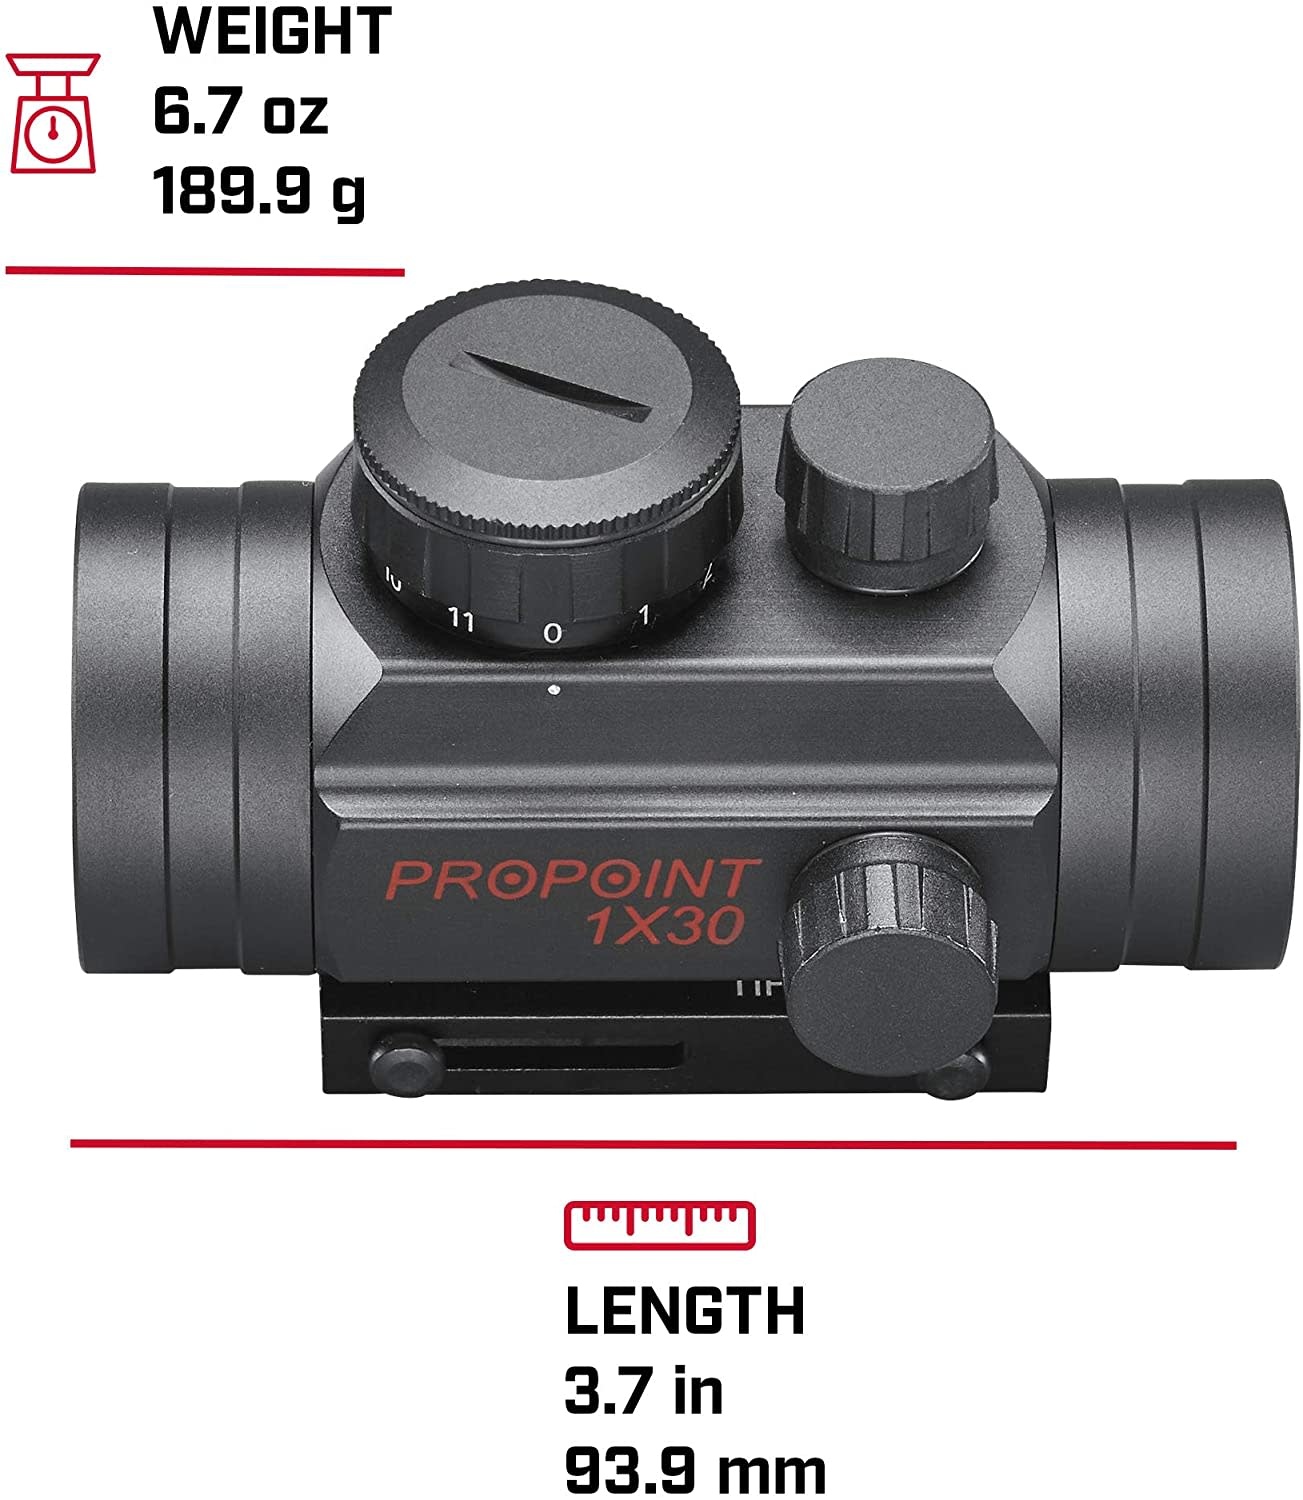 timeren krig fragment Tasco Pro Point 1x30mm 5 MOA Red Dot Rifle Scope - Backcountry Supplies